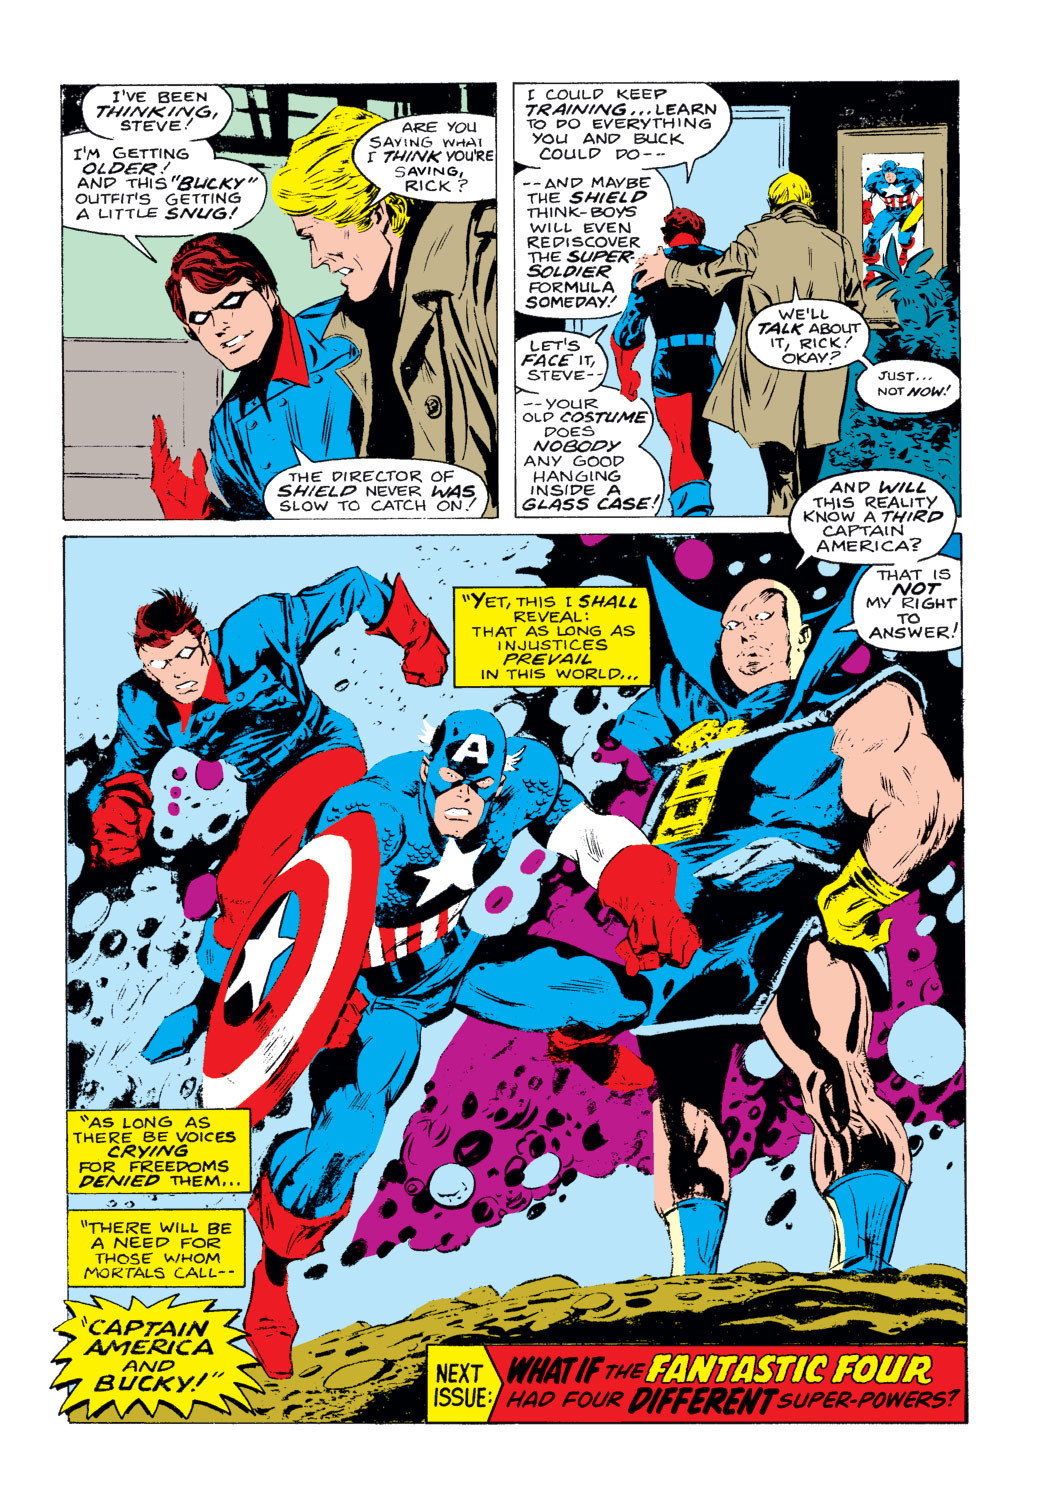 What If? (1977) issue 5 - Captain America hadn't vanished during World War Two - Page 34